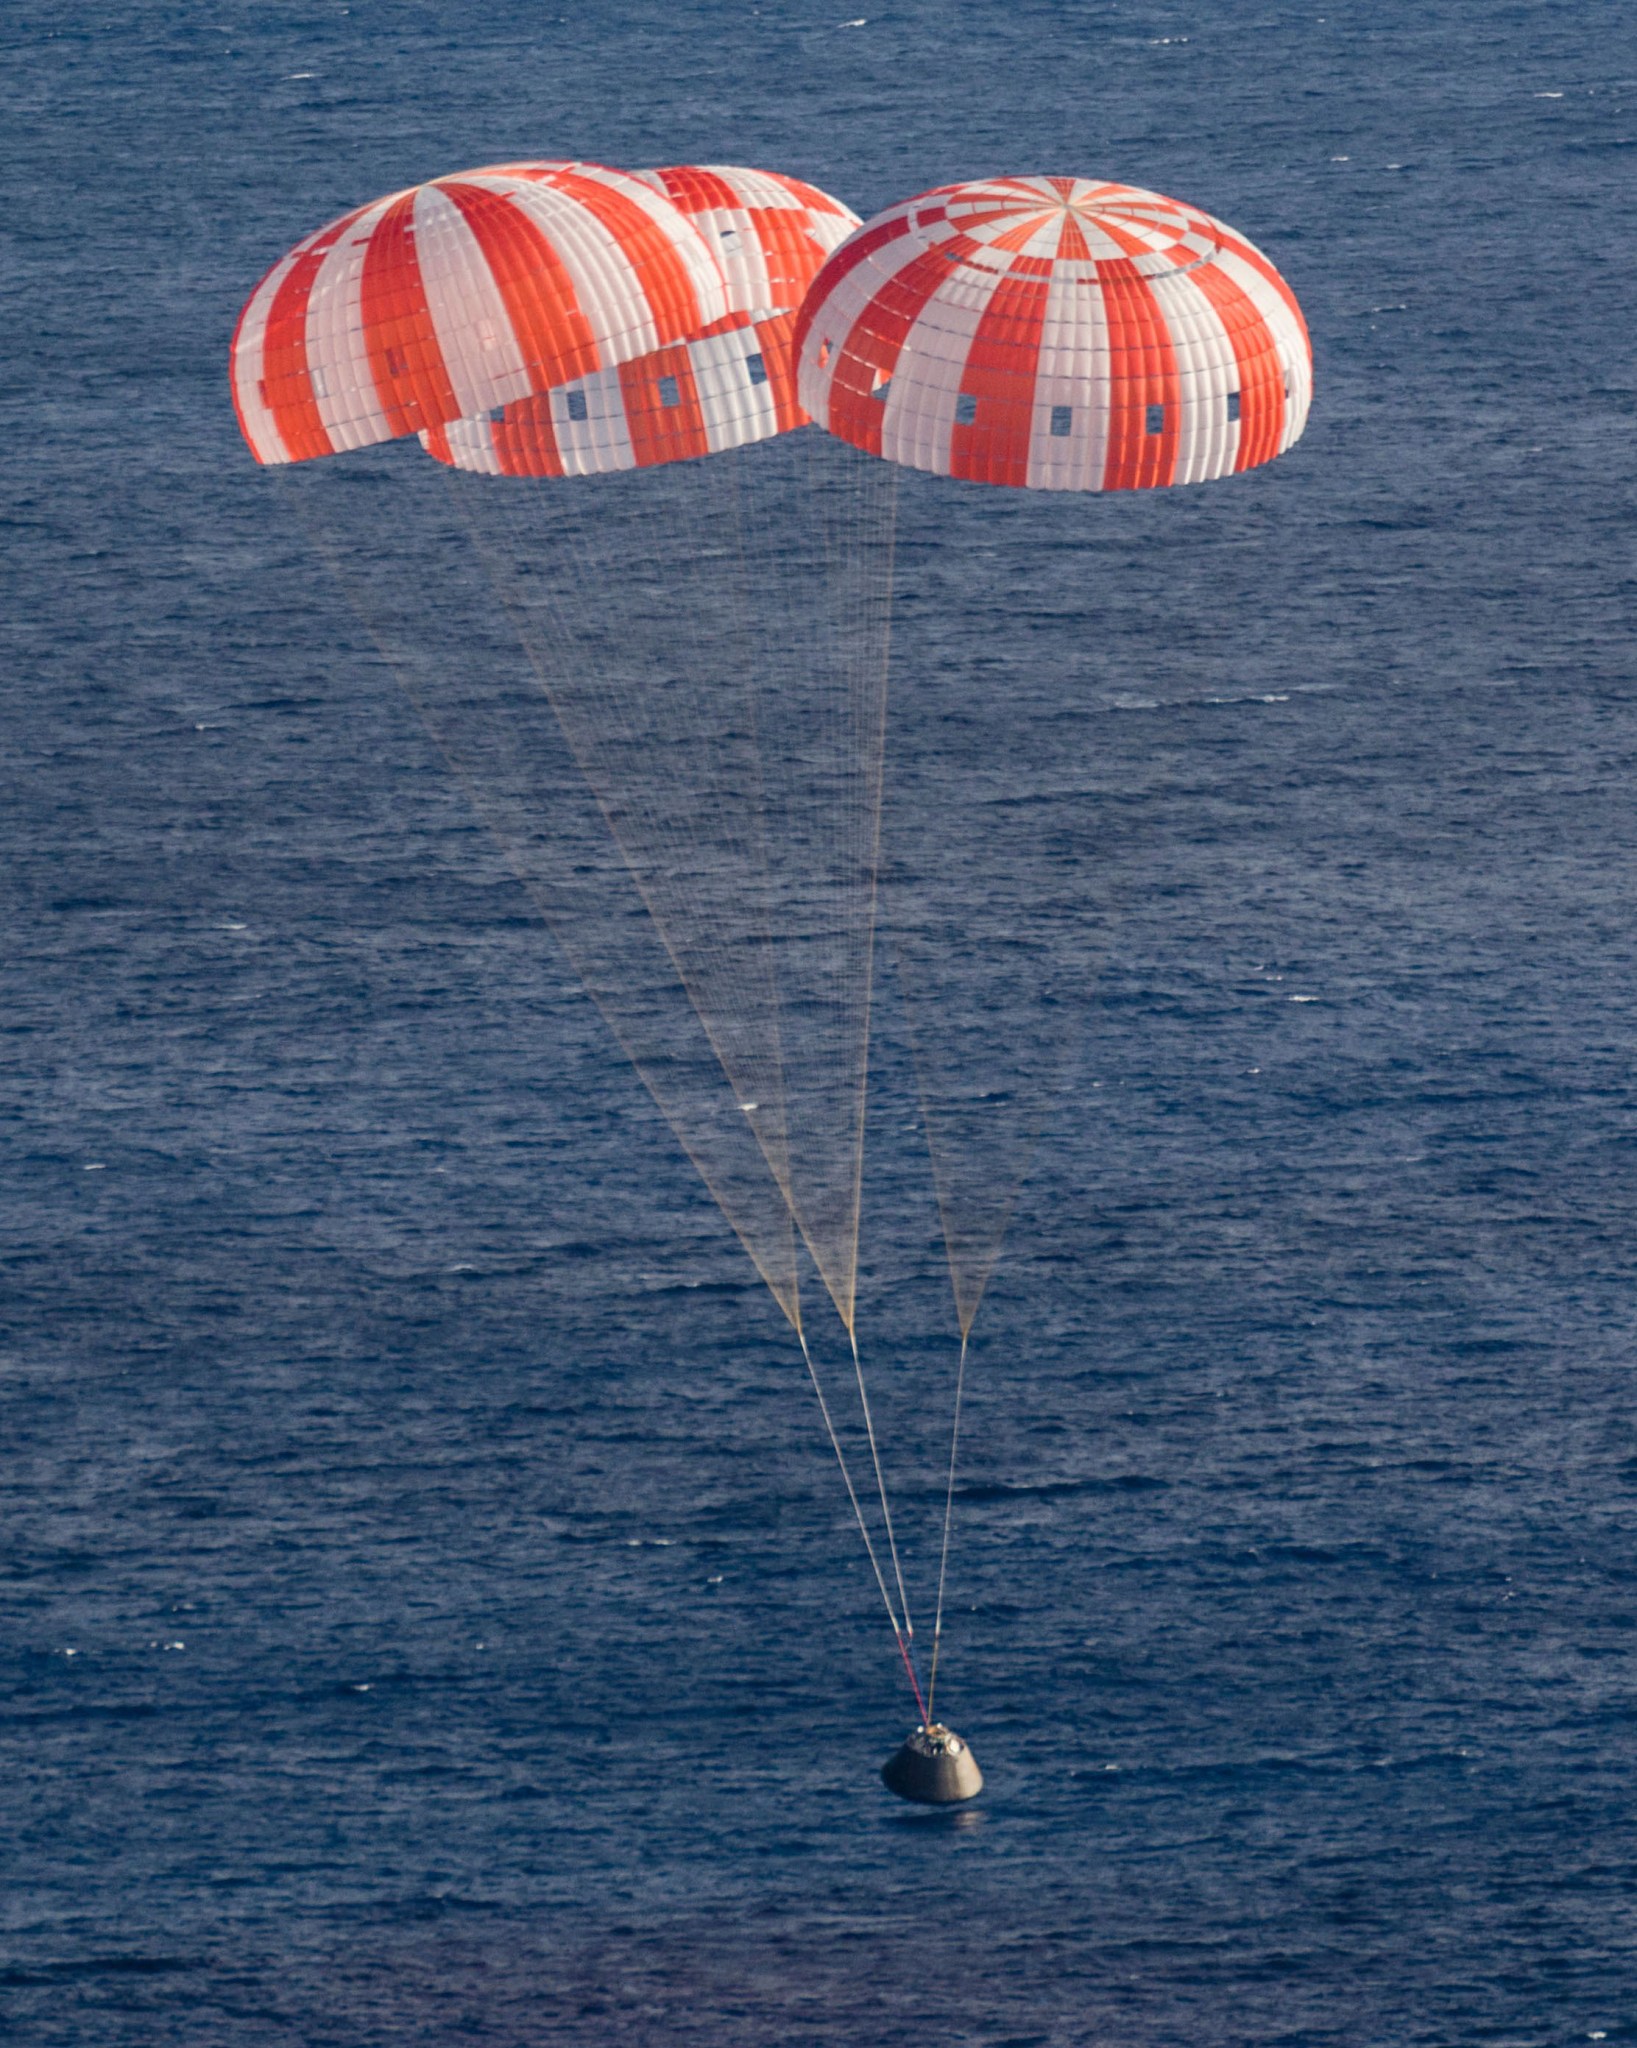 The Orion returns from space and its deployed parachute systems worked well.